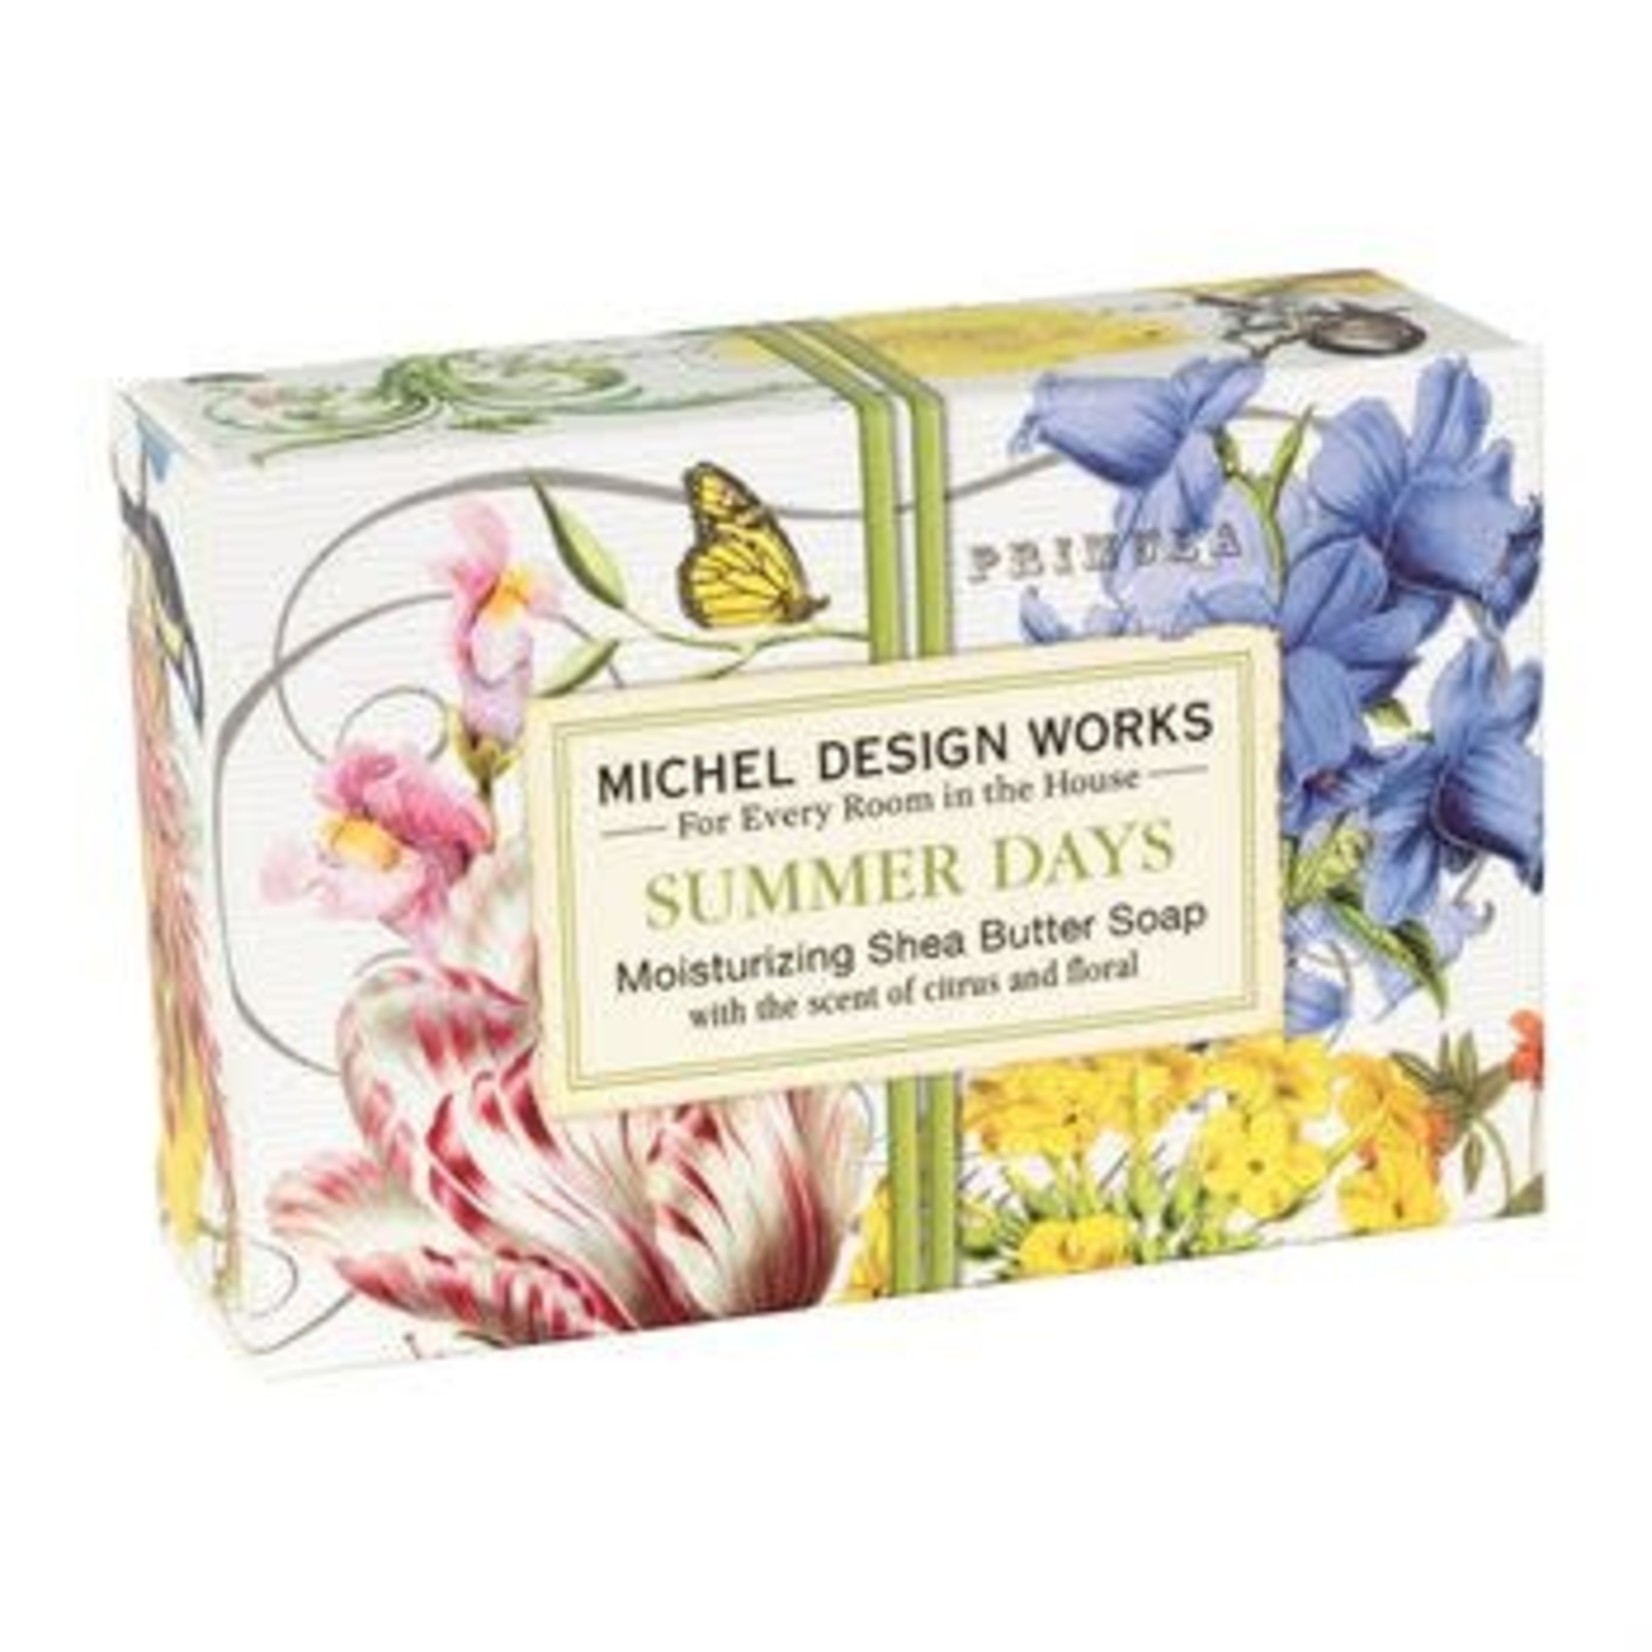 MICHELE DESIGN WORKS SUMMER DAYS 4.5OZ BOXED SOAP